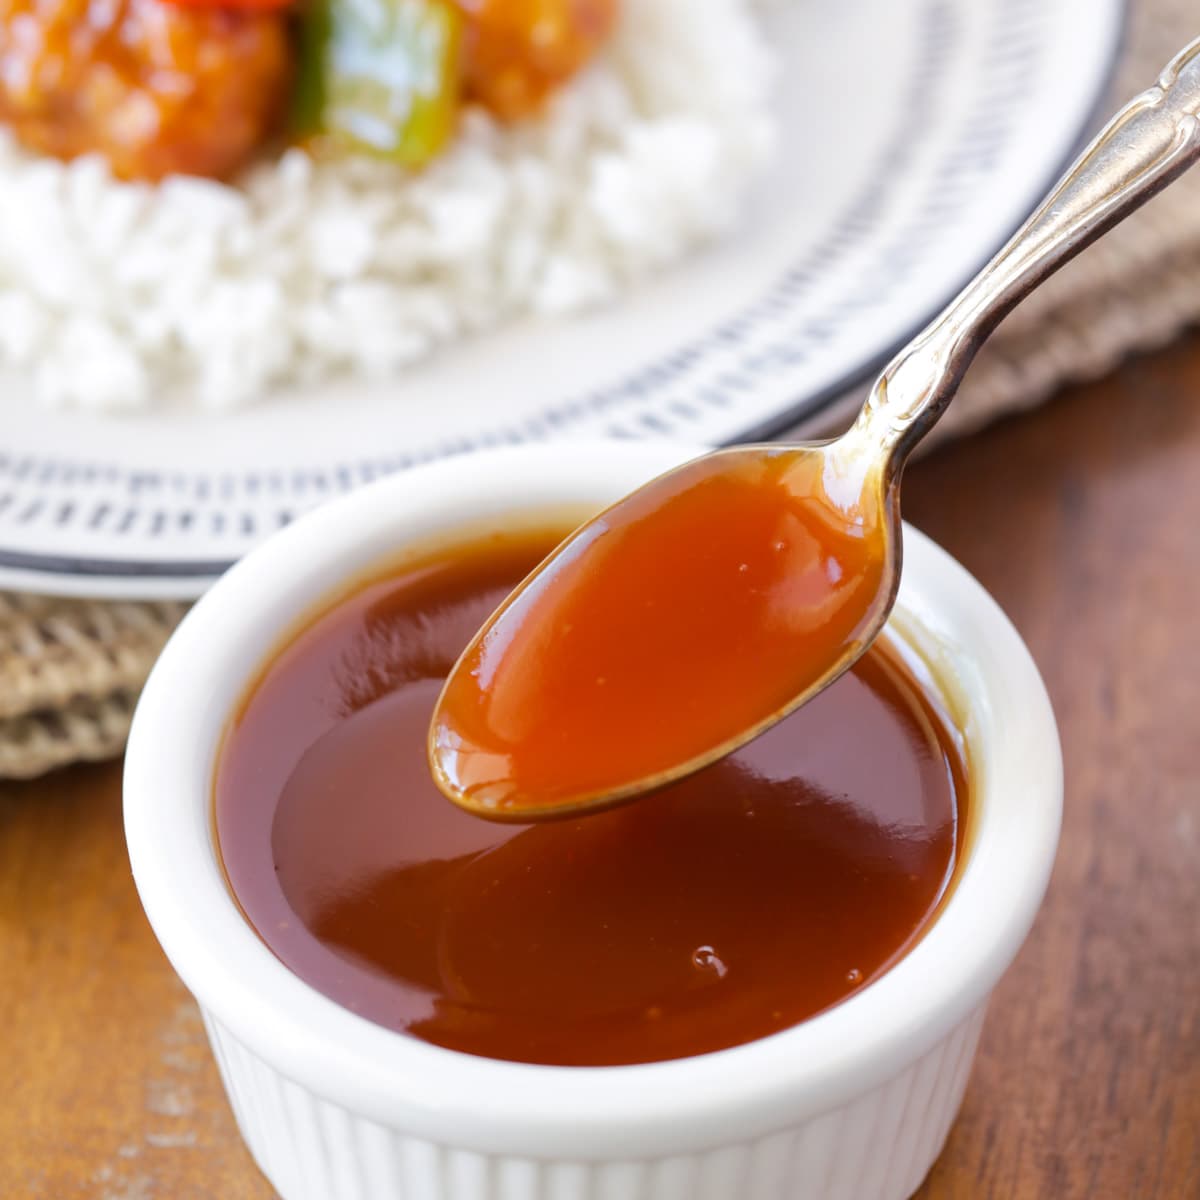 Bowl of sweet and sour sauce with a metal spoon